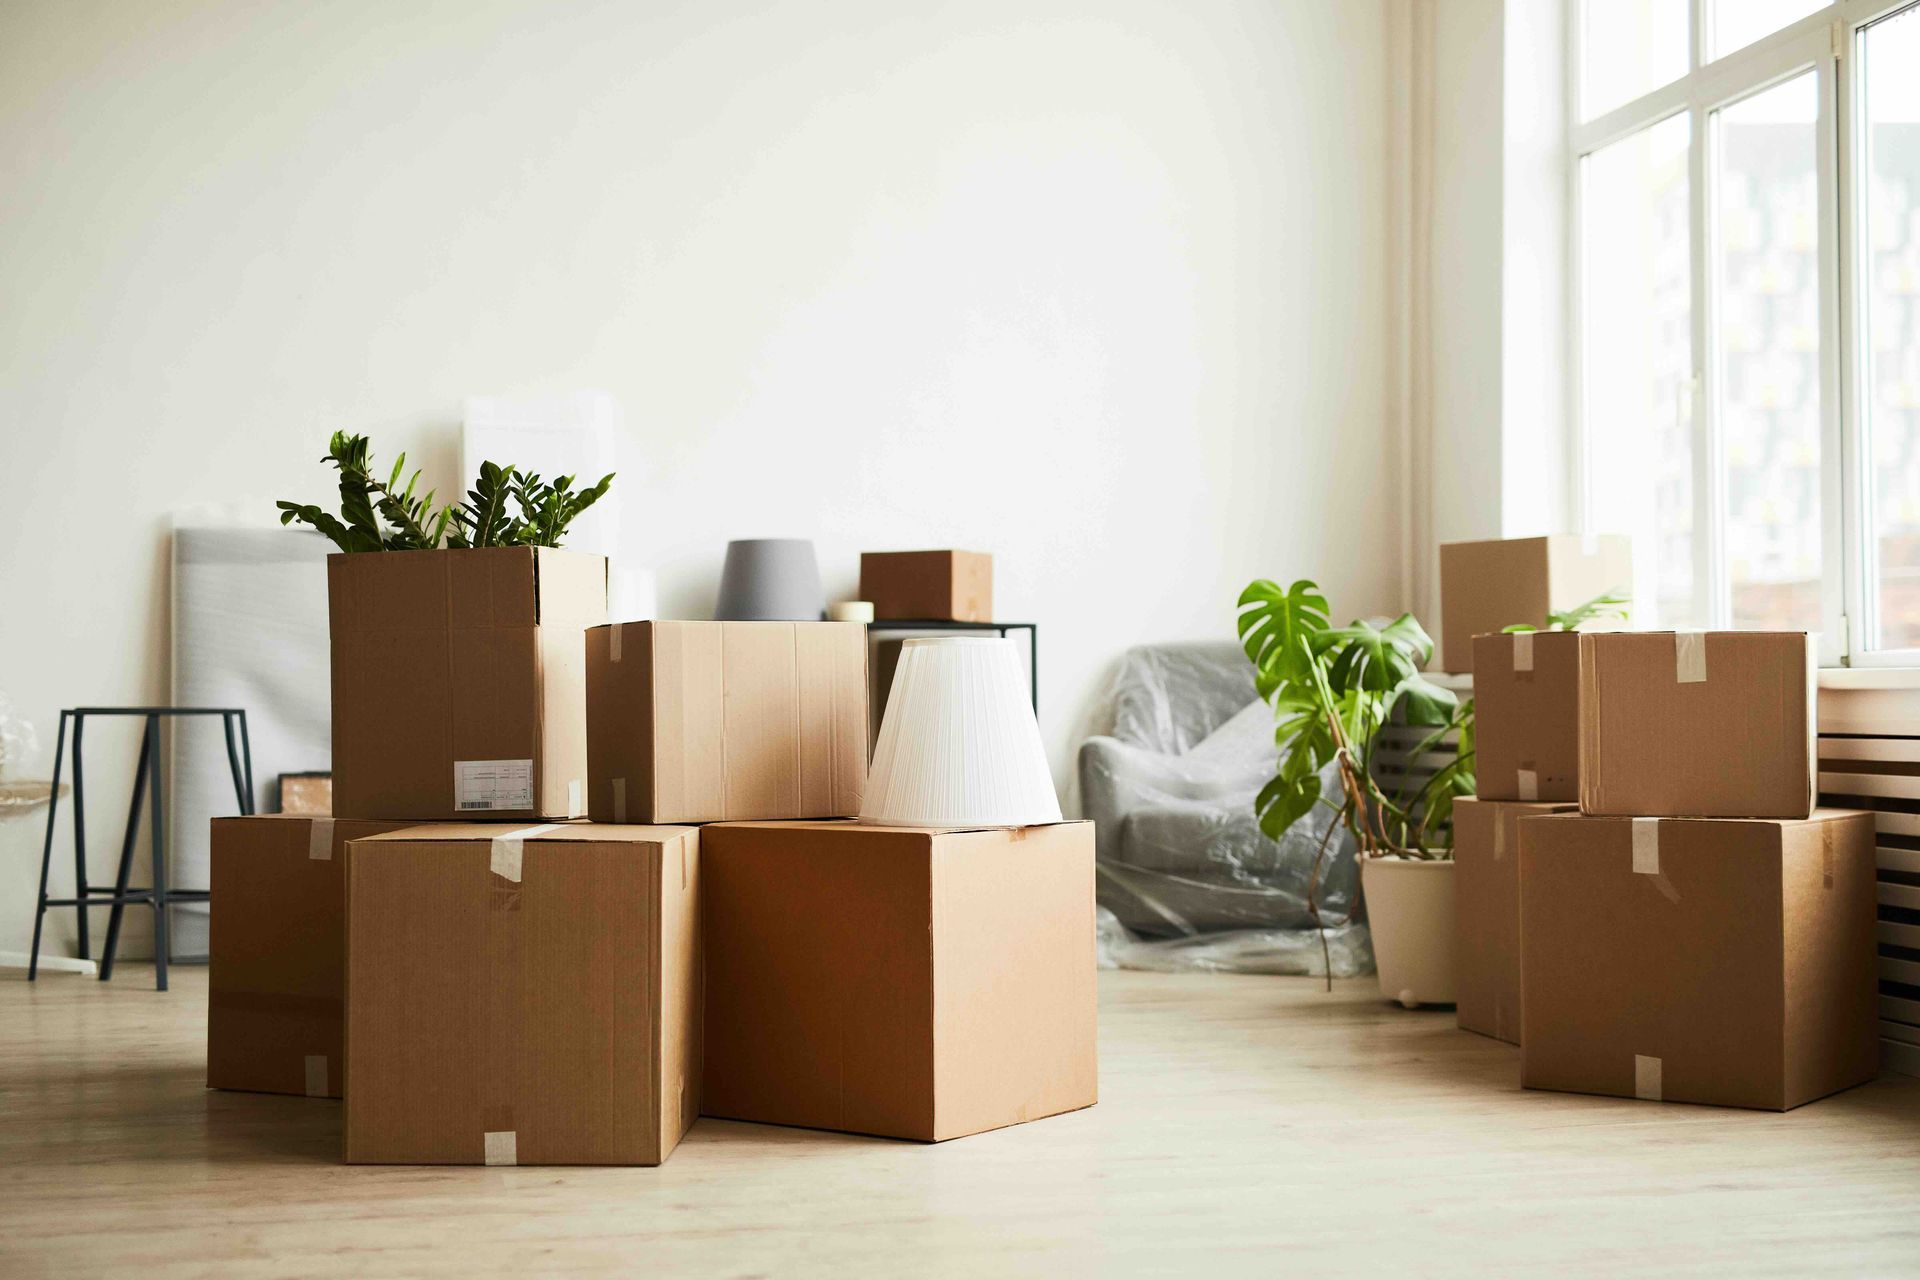 a living room filled with cardboard boxes and potted plants.